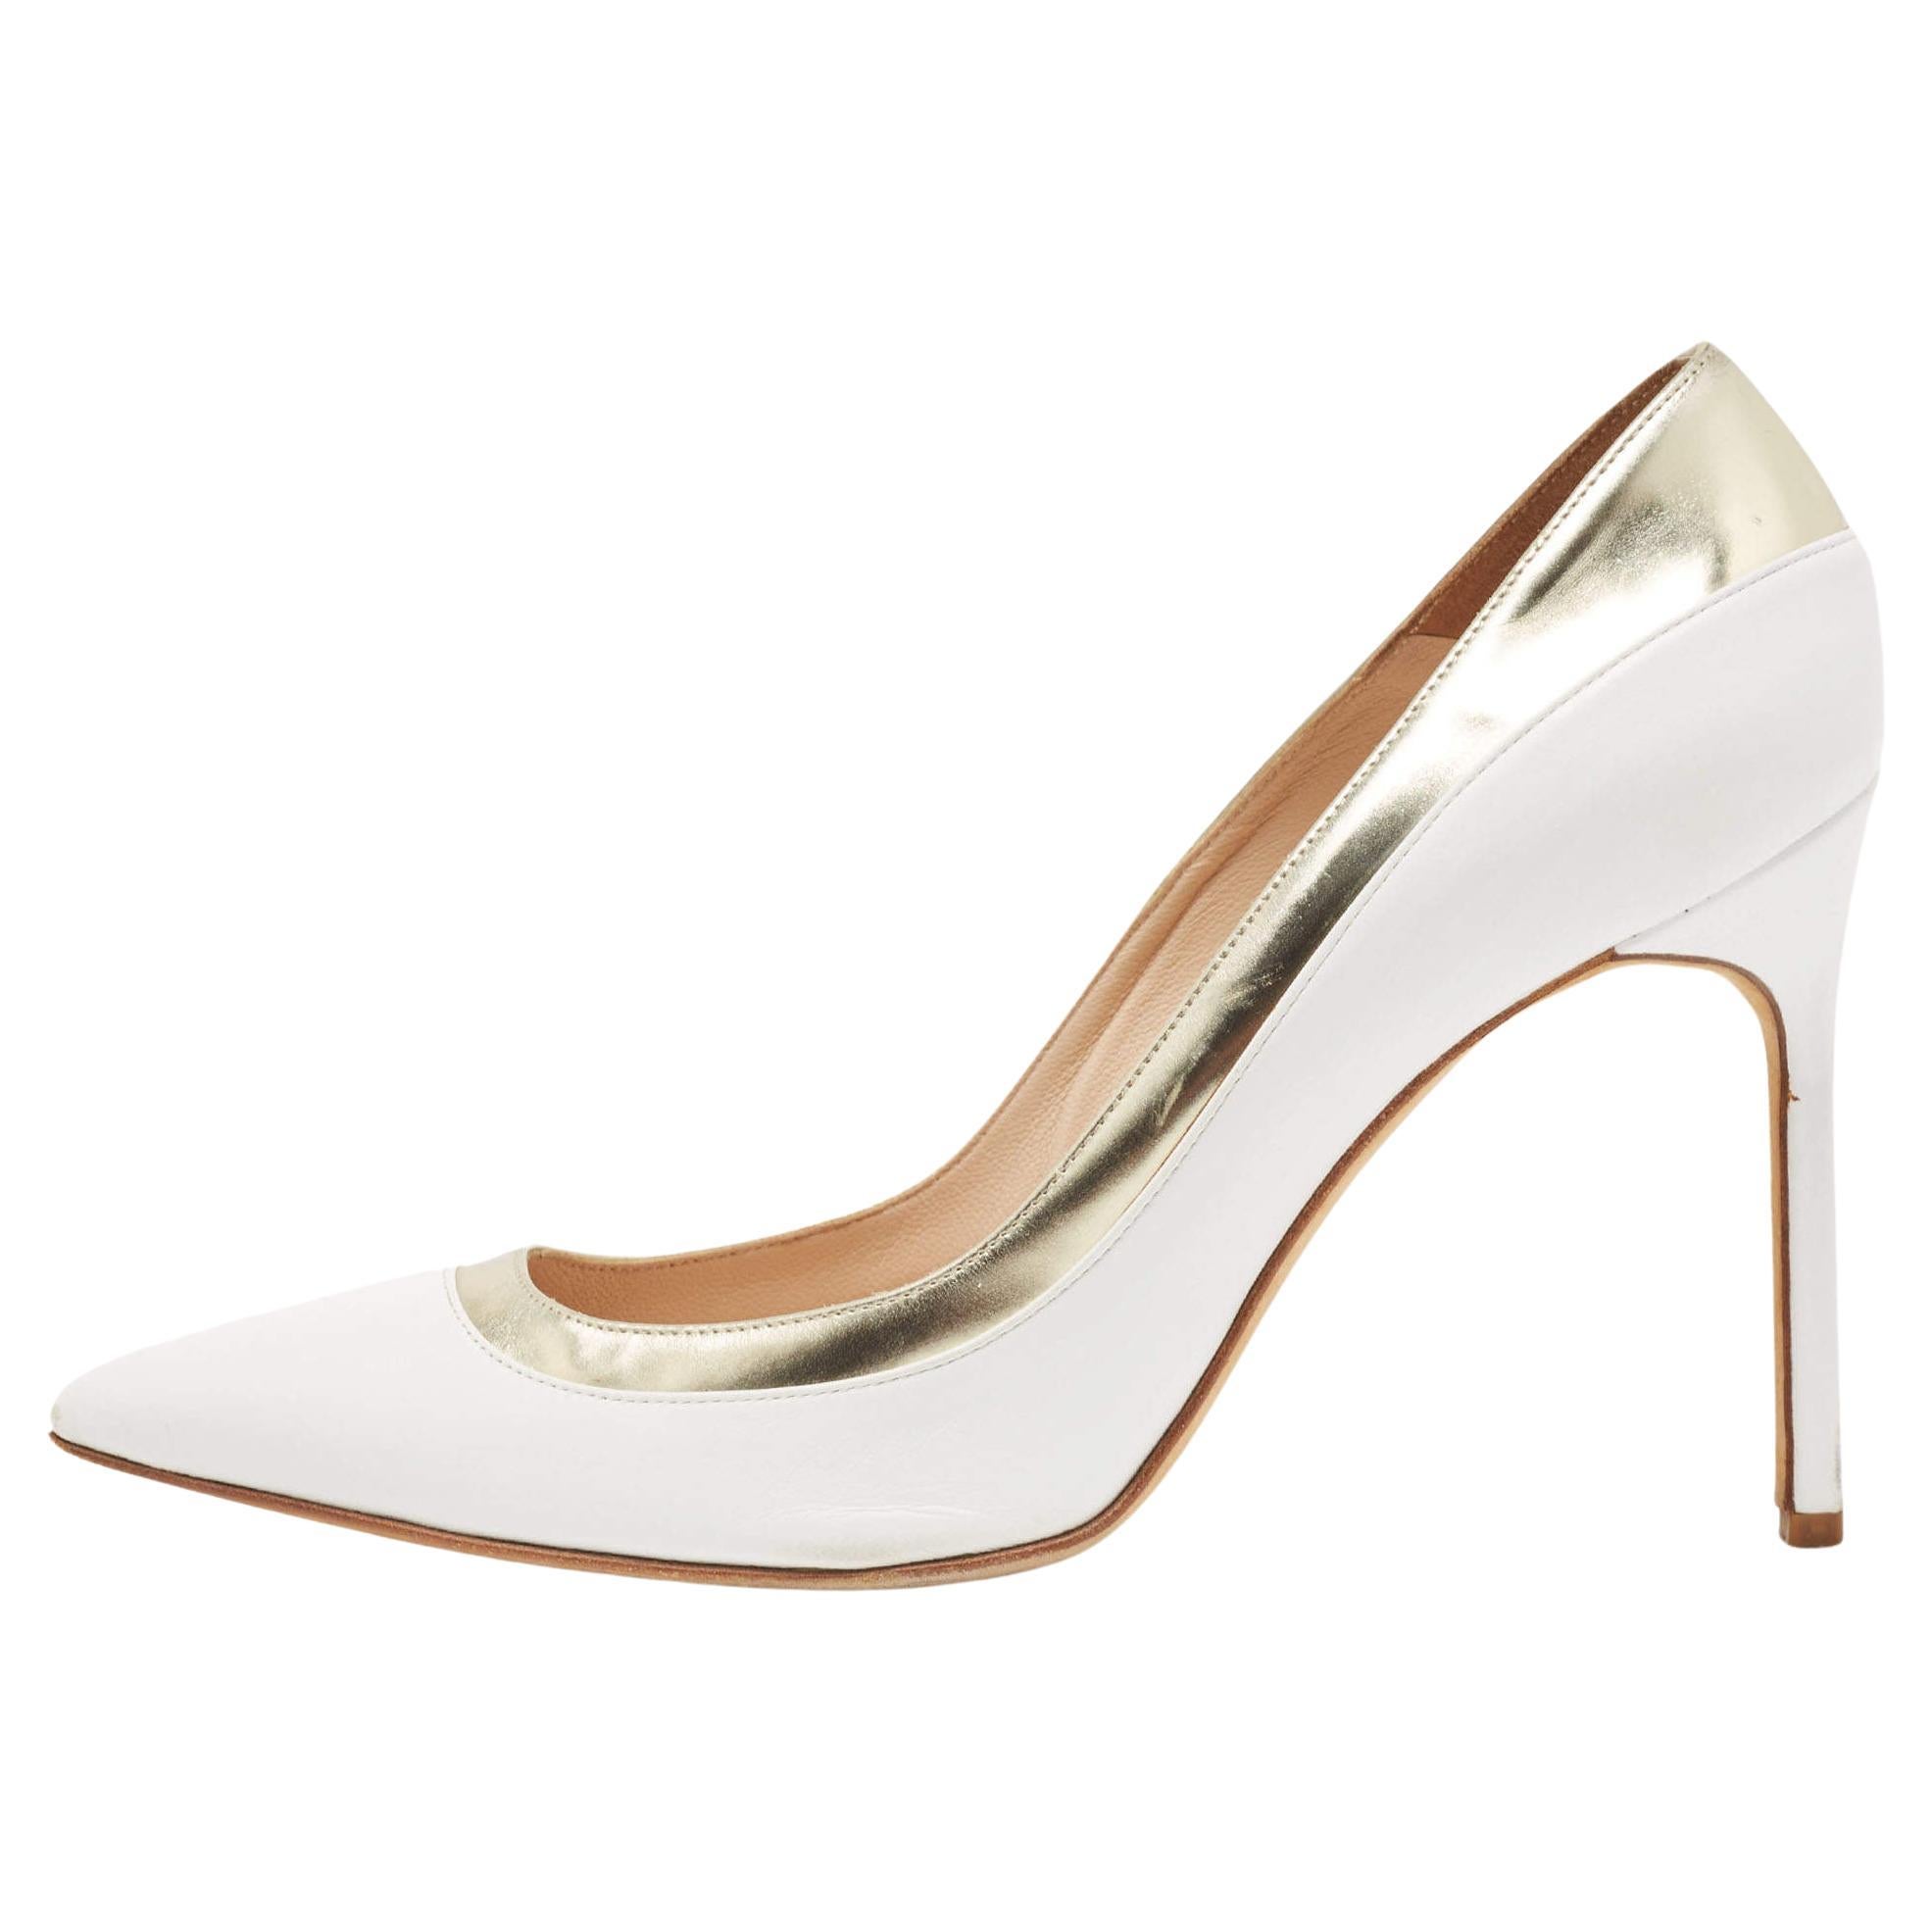 Manolo Blahnik White/Gold Leather Pointed Toe Pumps Size 40